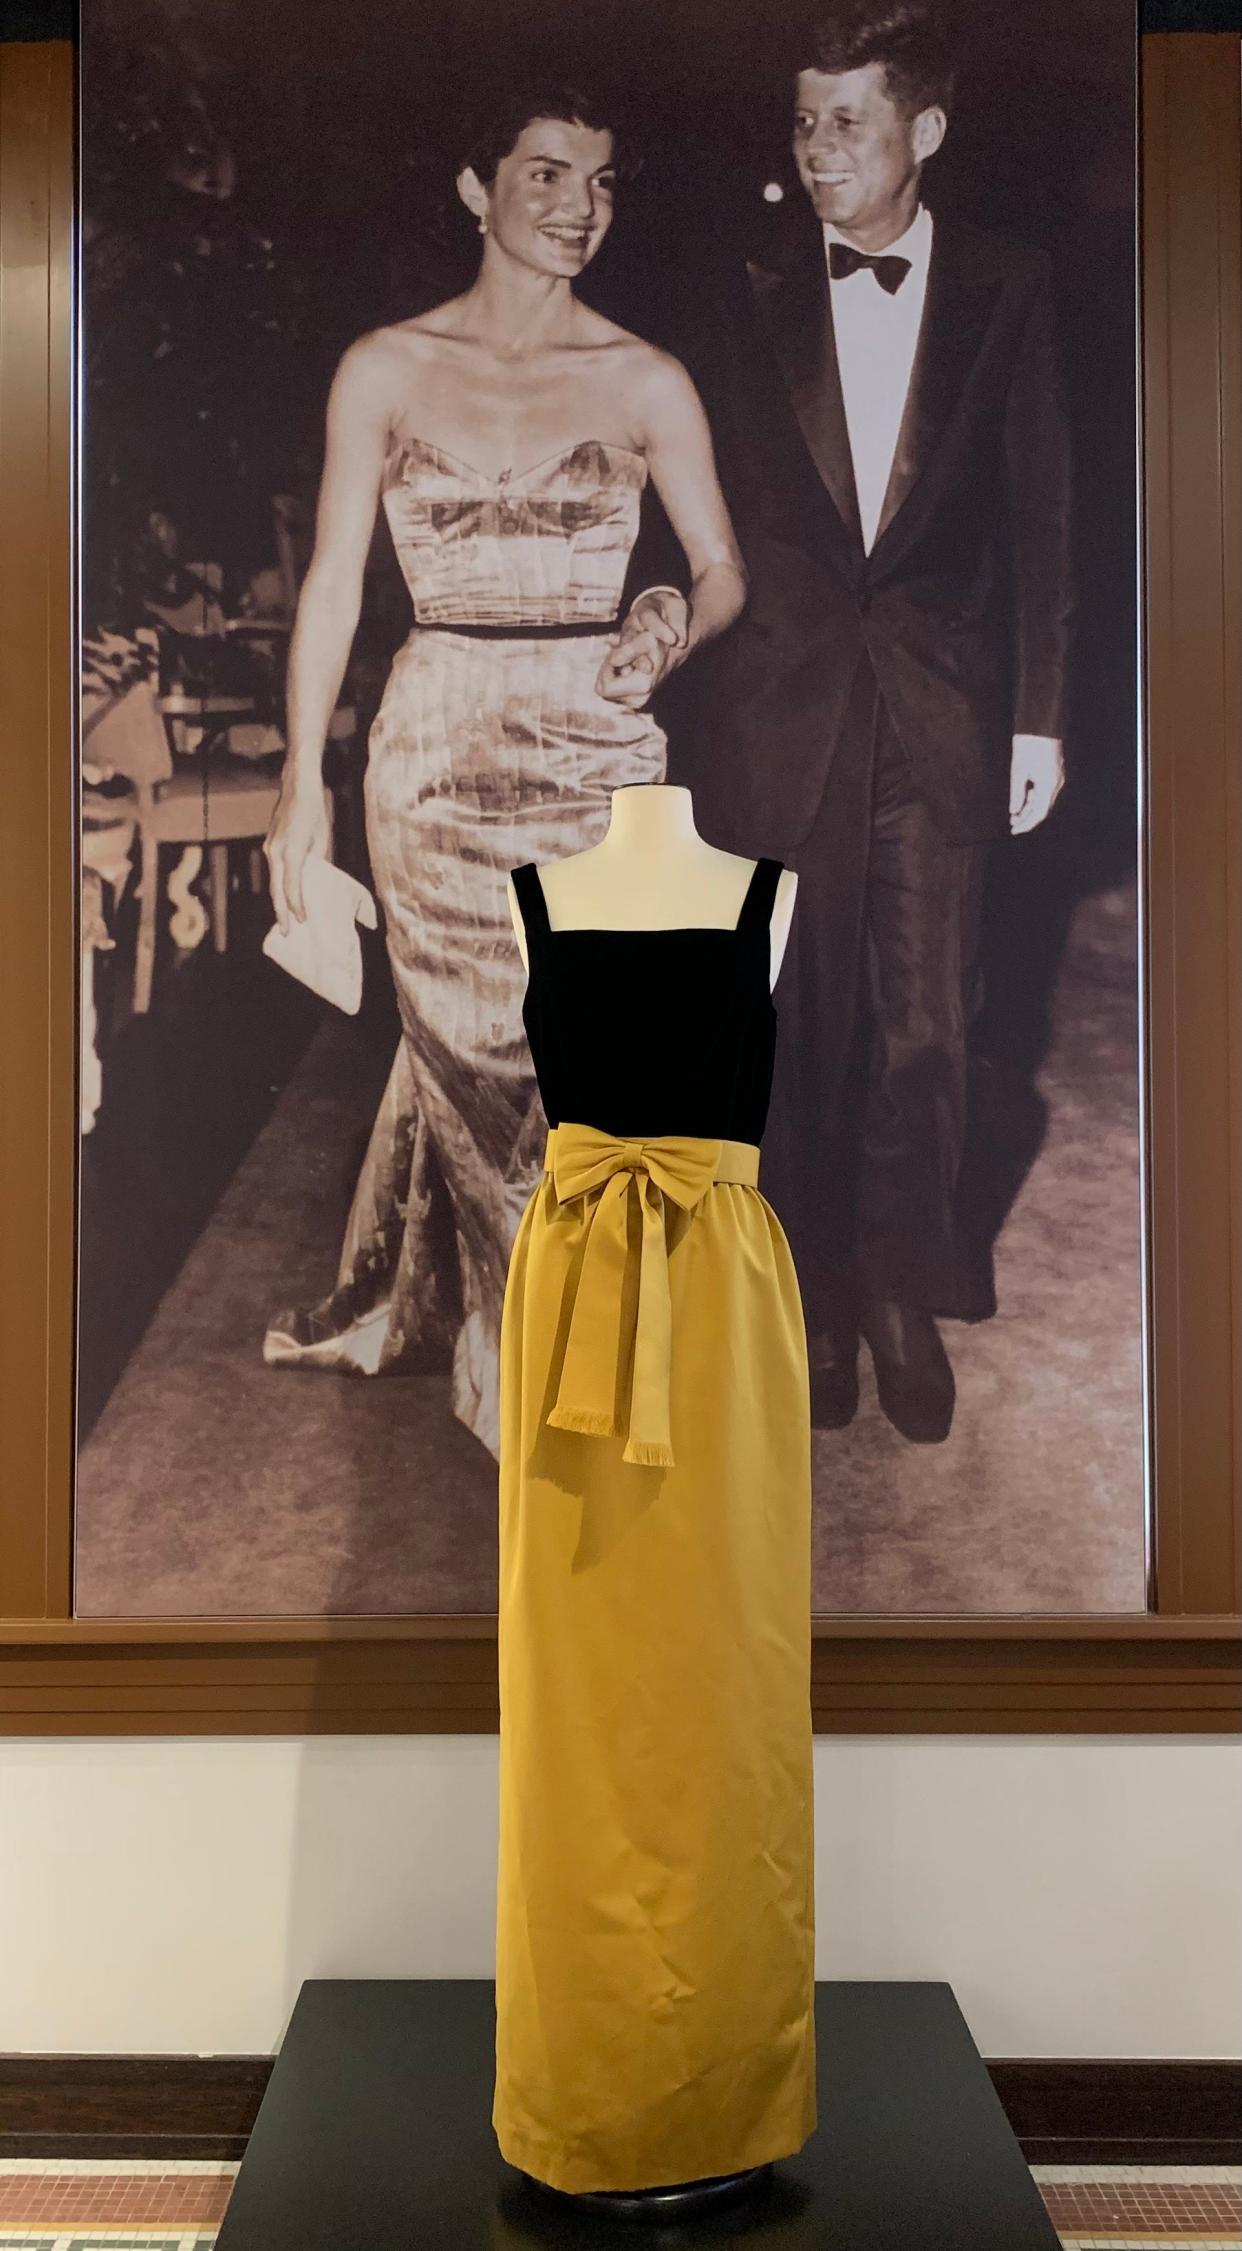 The Kennedys brought Camelot to Palm Beach. In the Bert Morgan photo on display, Jacqueline and John F. Kennedy are out on the town, probably in the late 1950s. The yellow-and-black gown is a reproduction of a Chez Ninon dress the first lady wore to a state dinner in 1961.